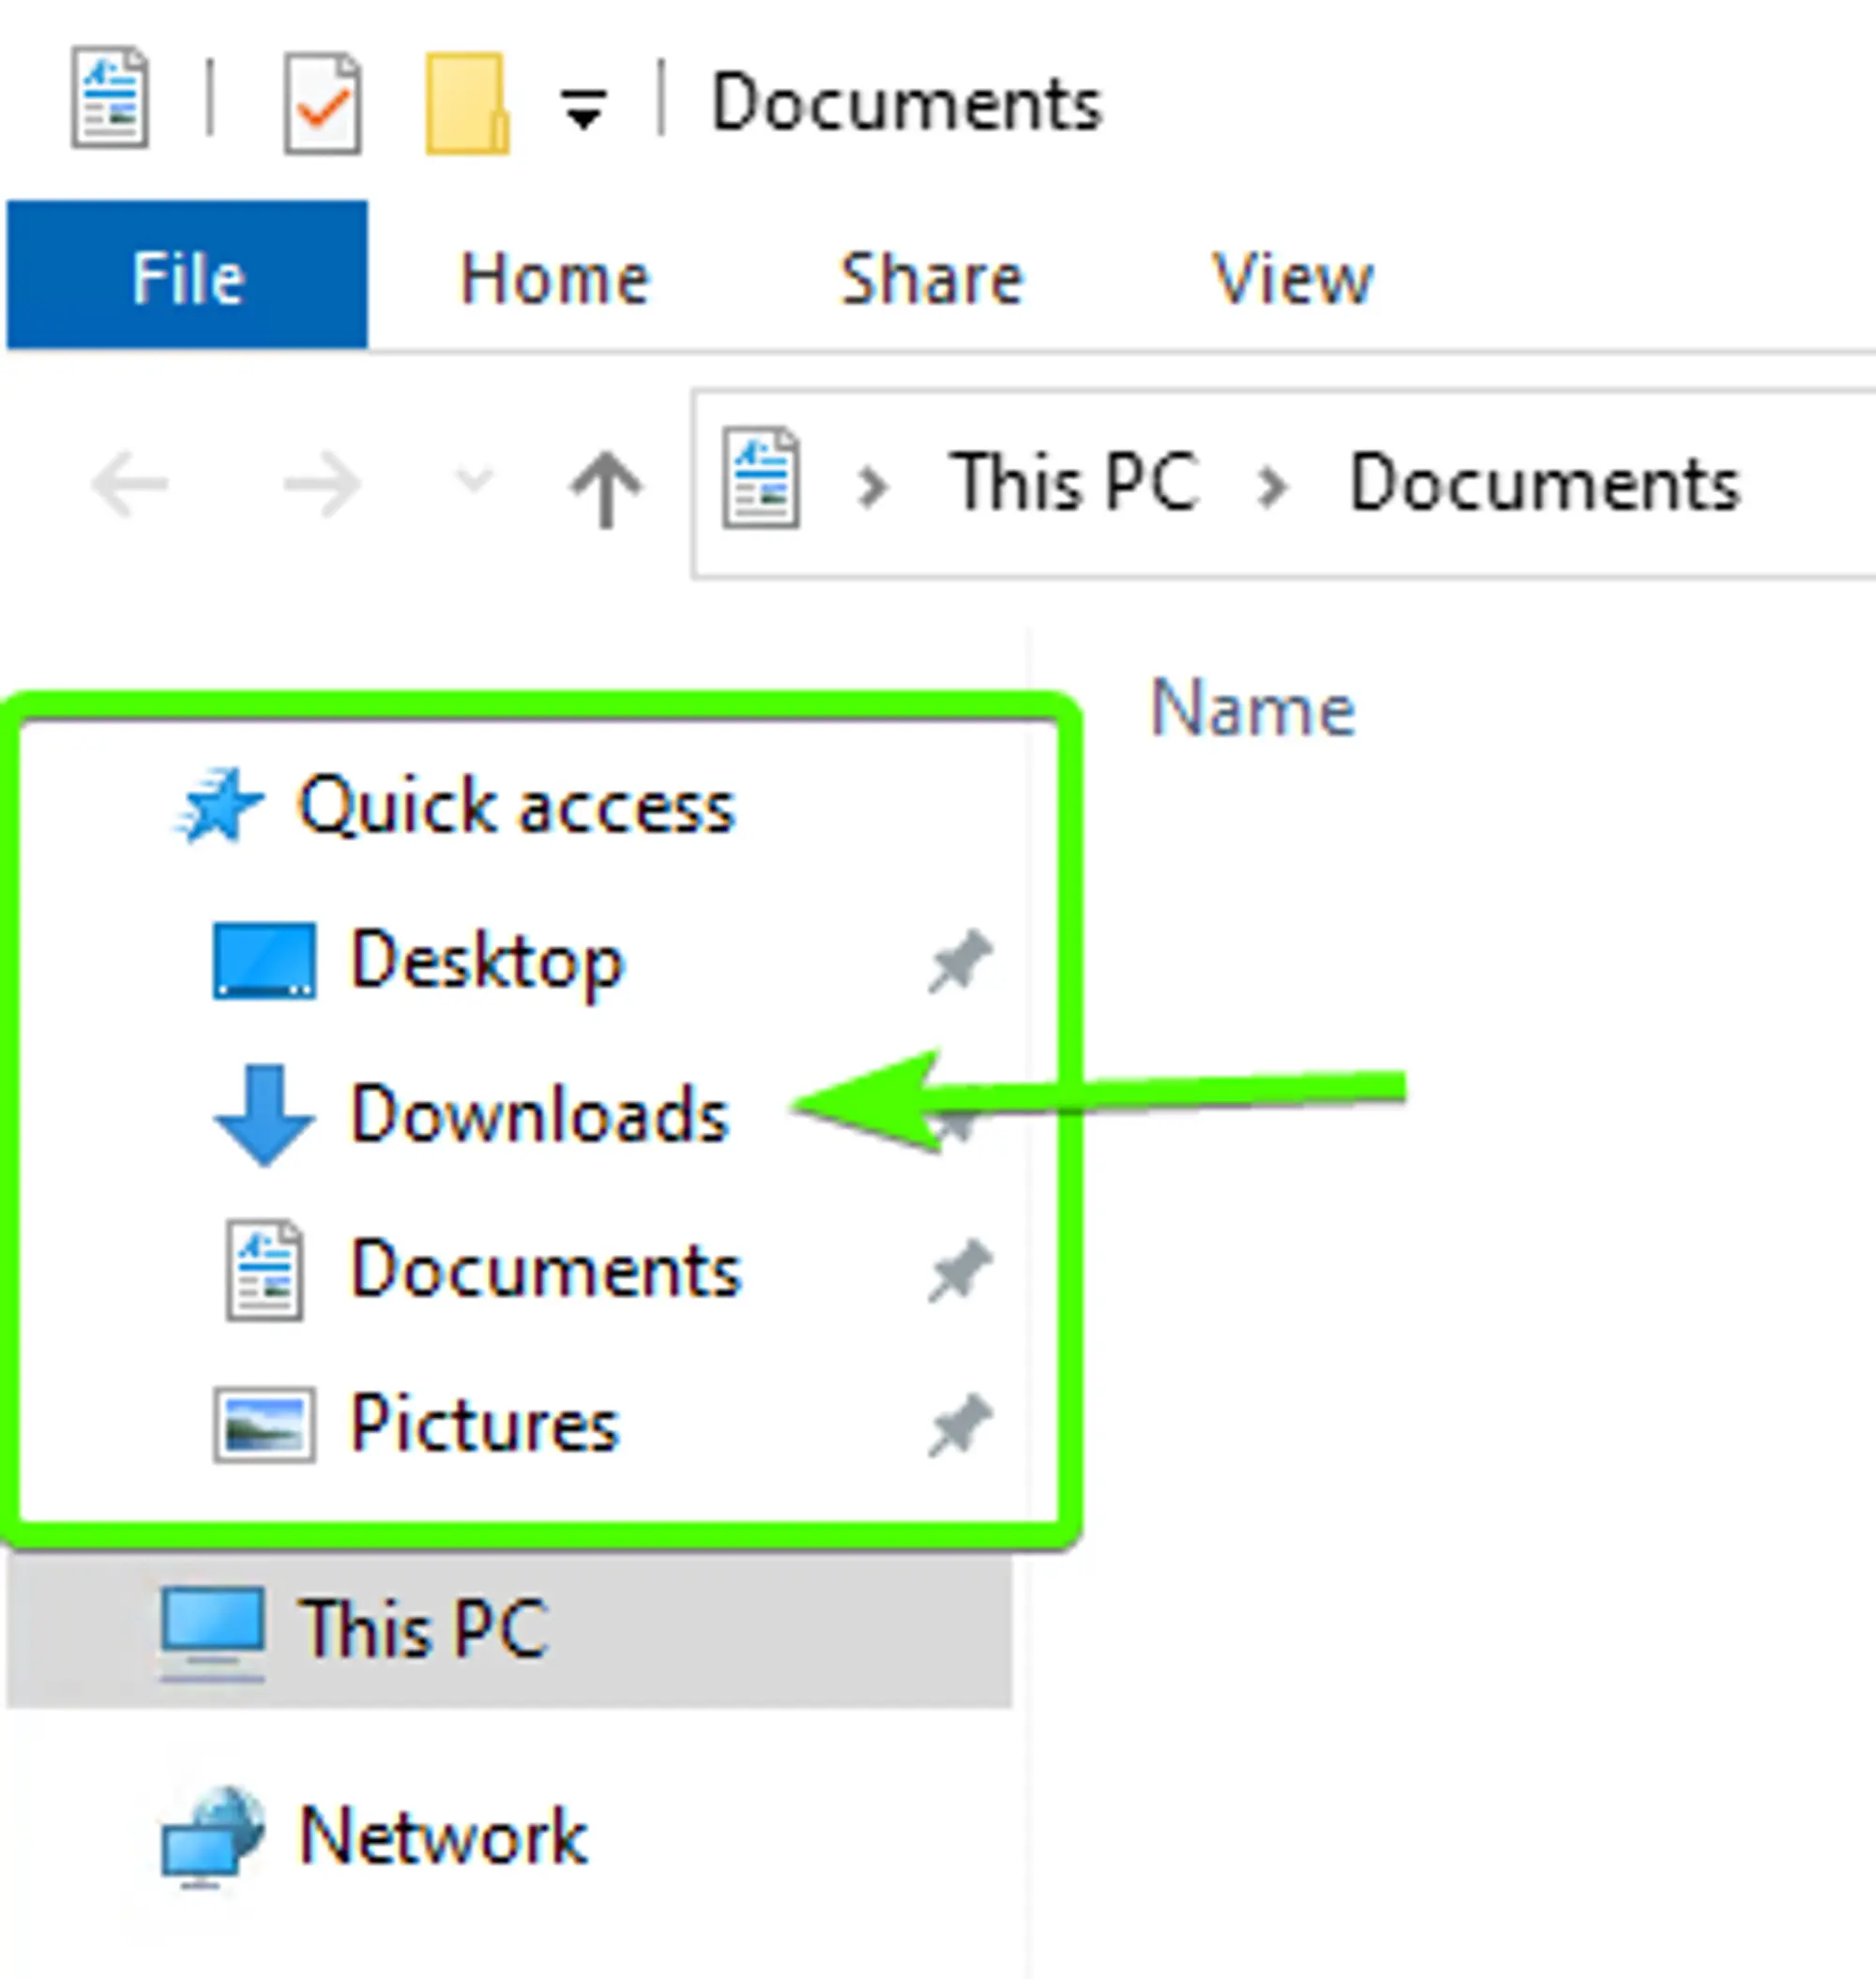 The Windows Quick Access menu, located on the top right of the file manager under the address bar